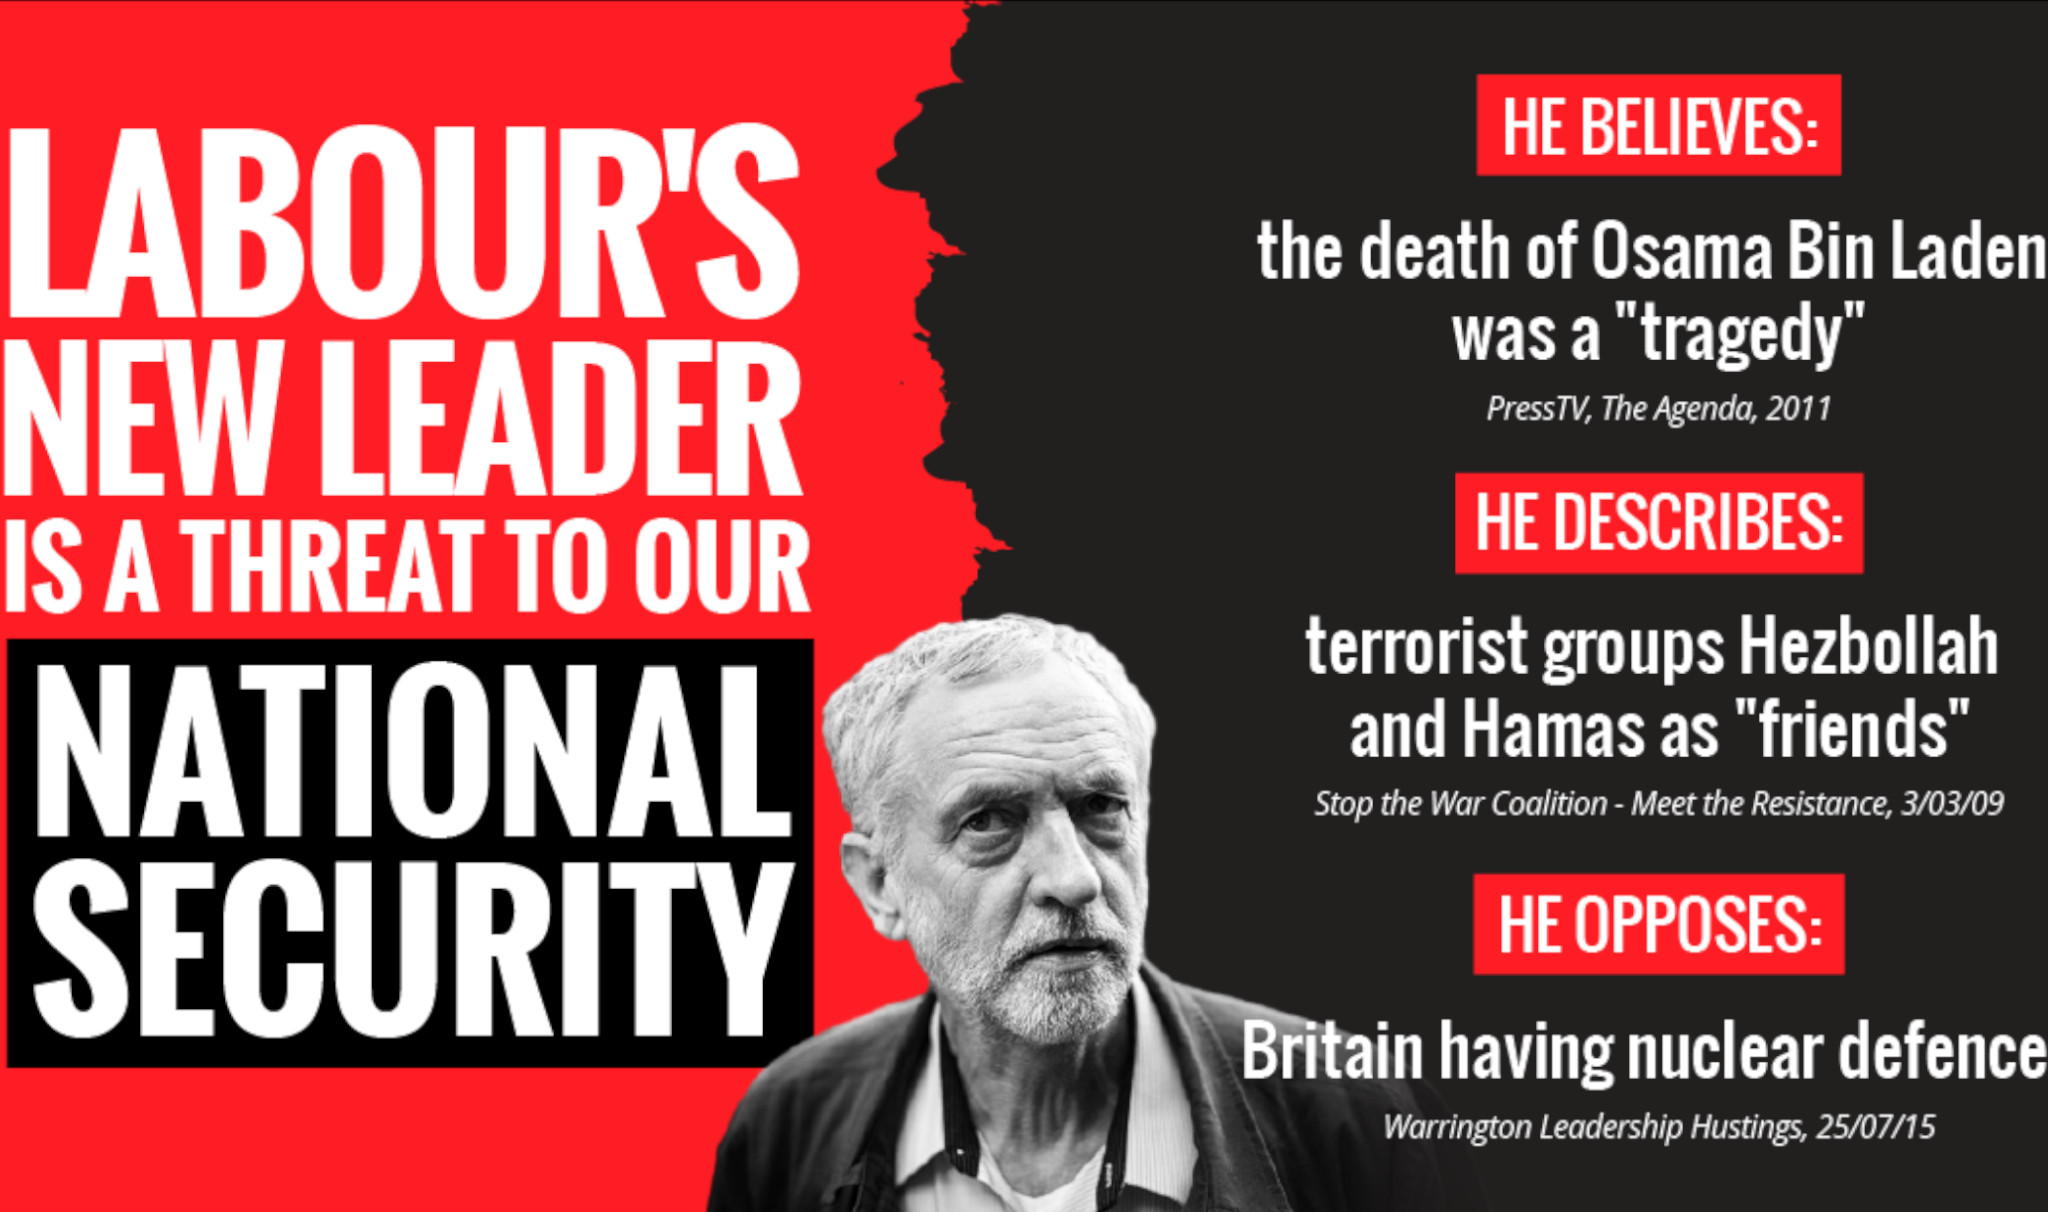 How the UK military and intelligence establishment is working to stop Jeremy Corbyn becoming prime minister